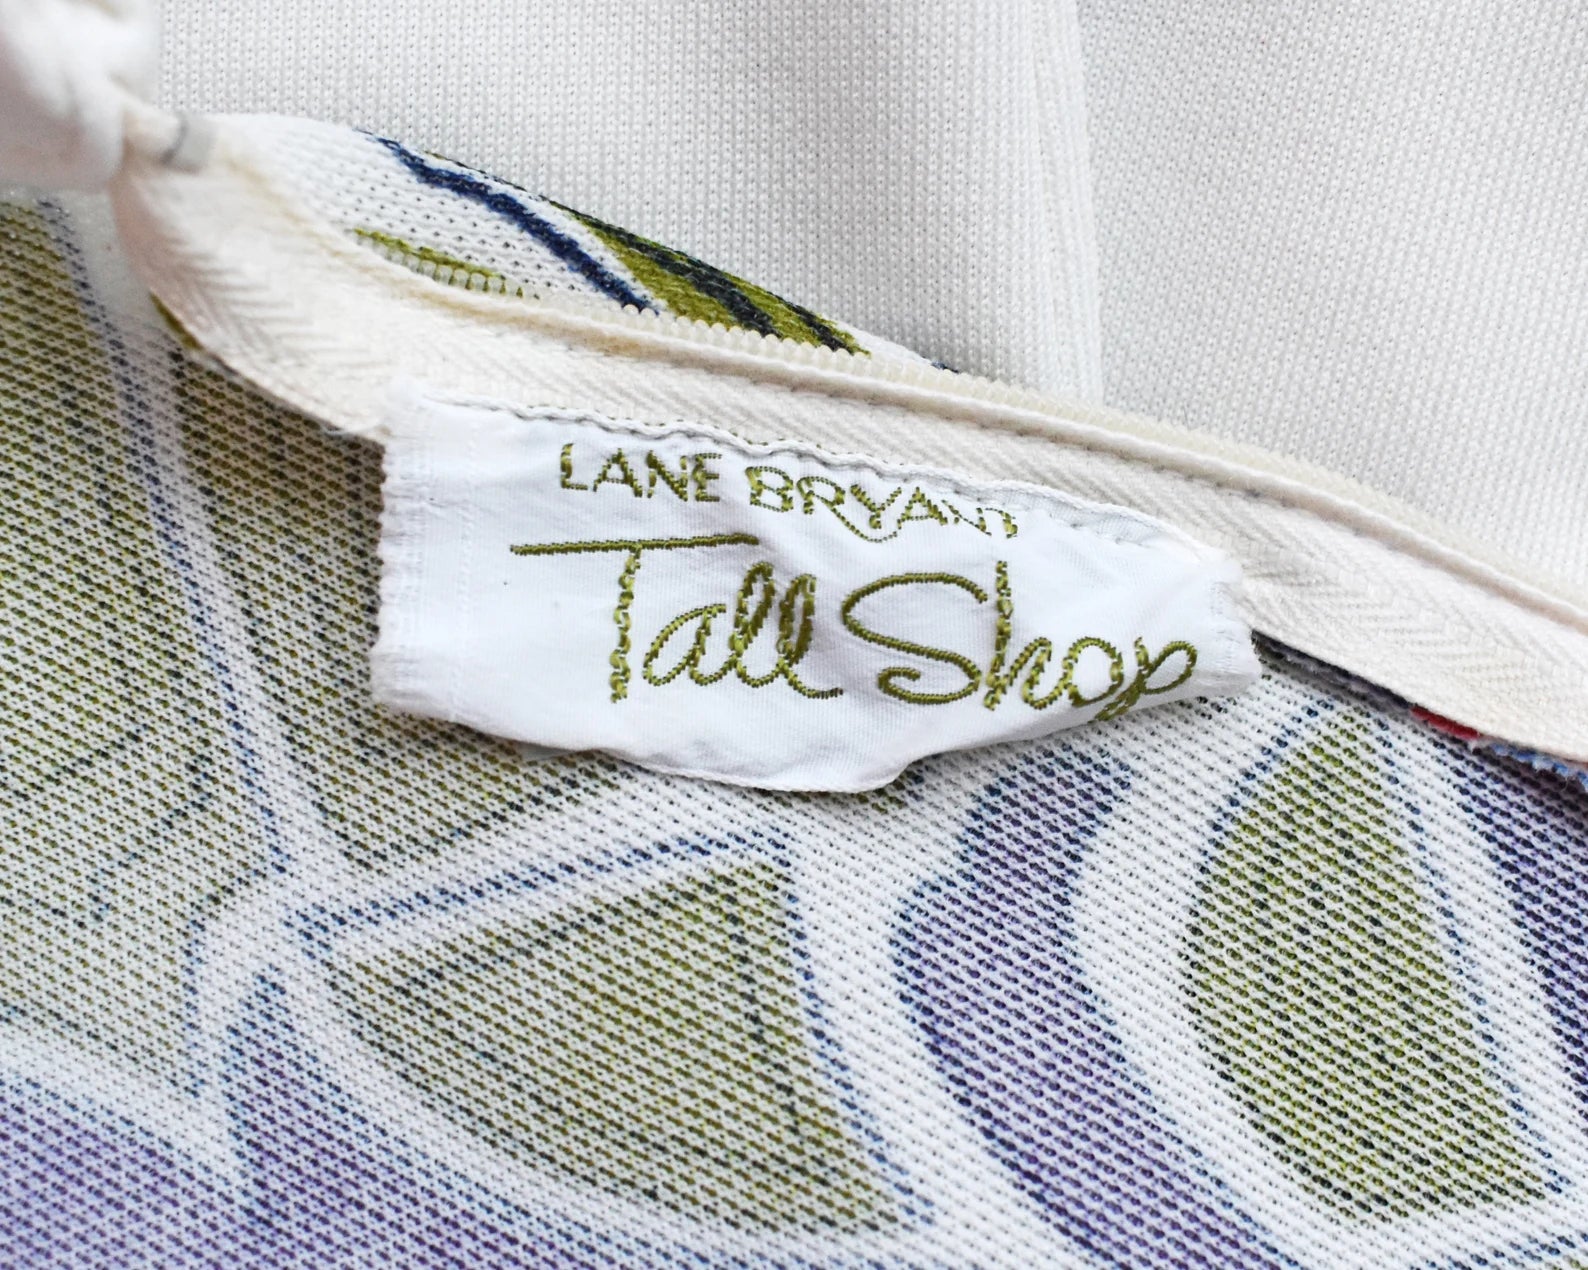 Close up of the tag which says Lane Bryant Tall Shop